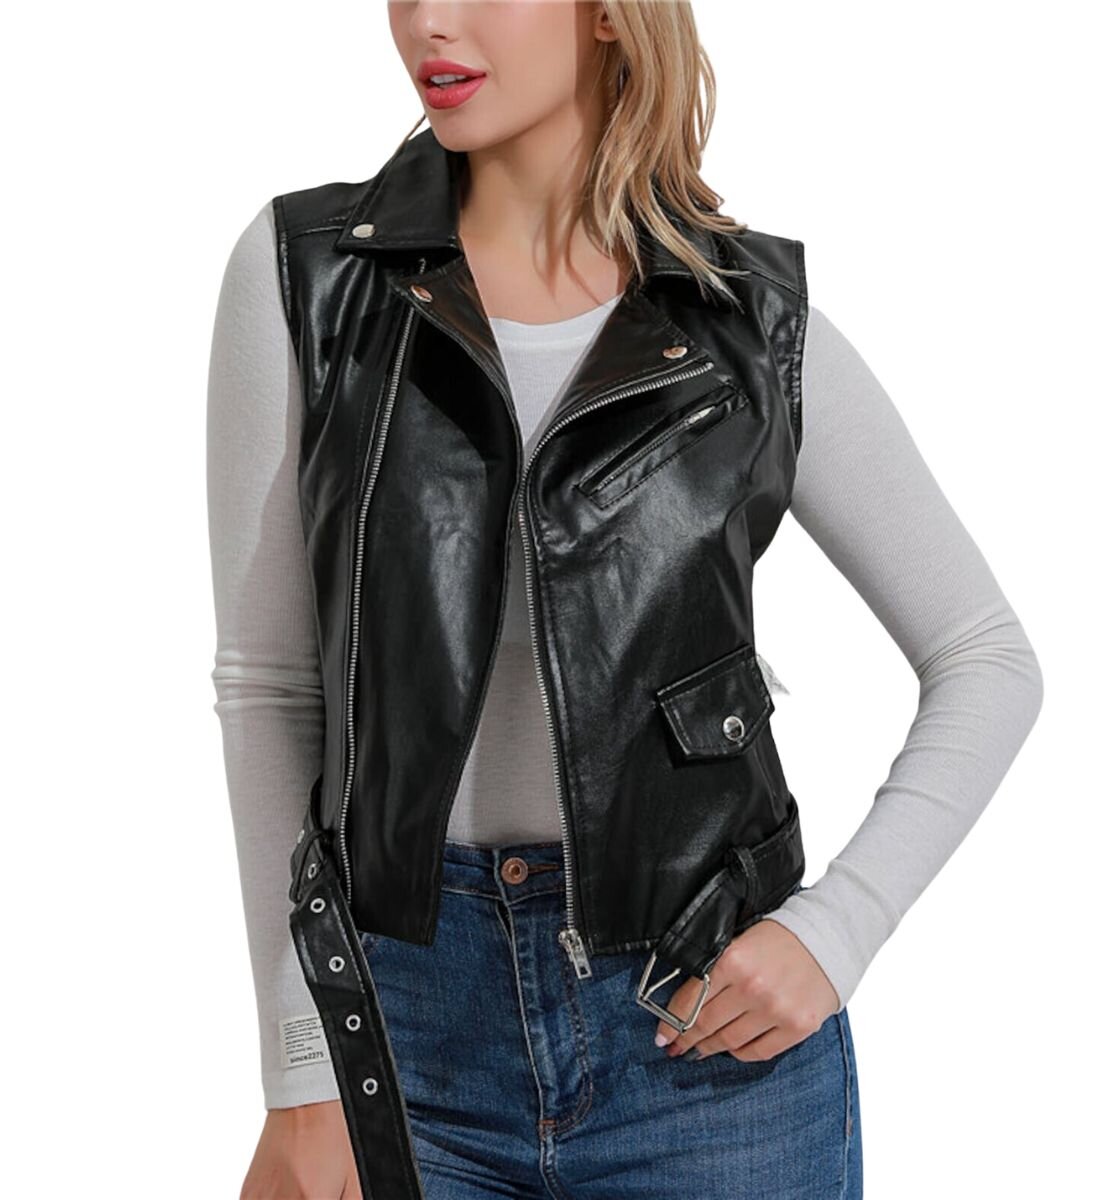 Riding in Style: Women's Leather Motorcycle Vest for Motorcycle Clubs